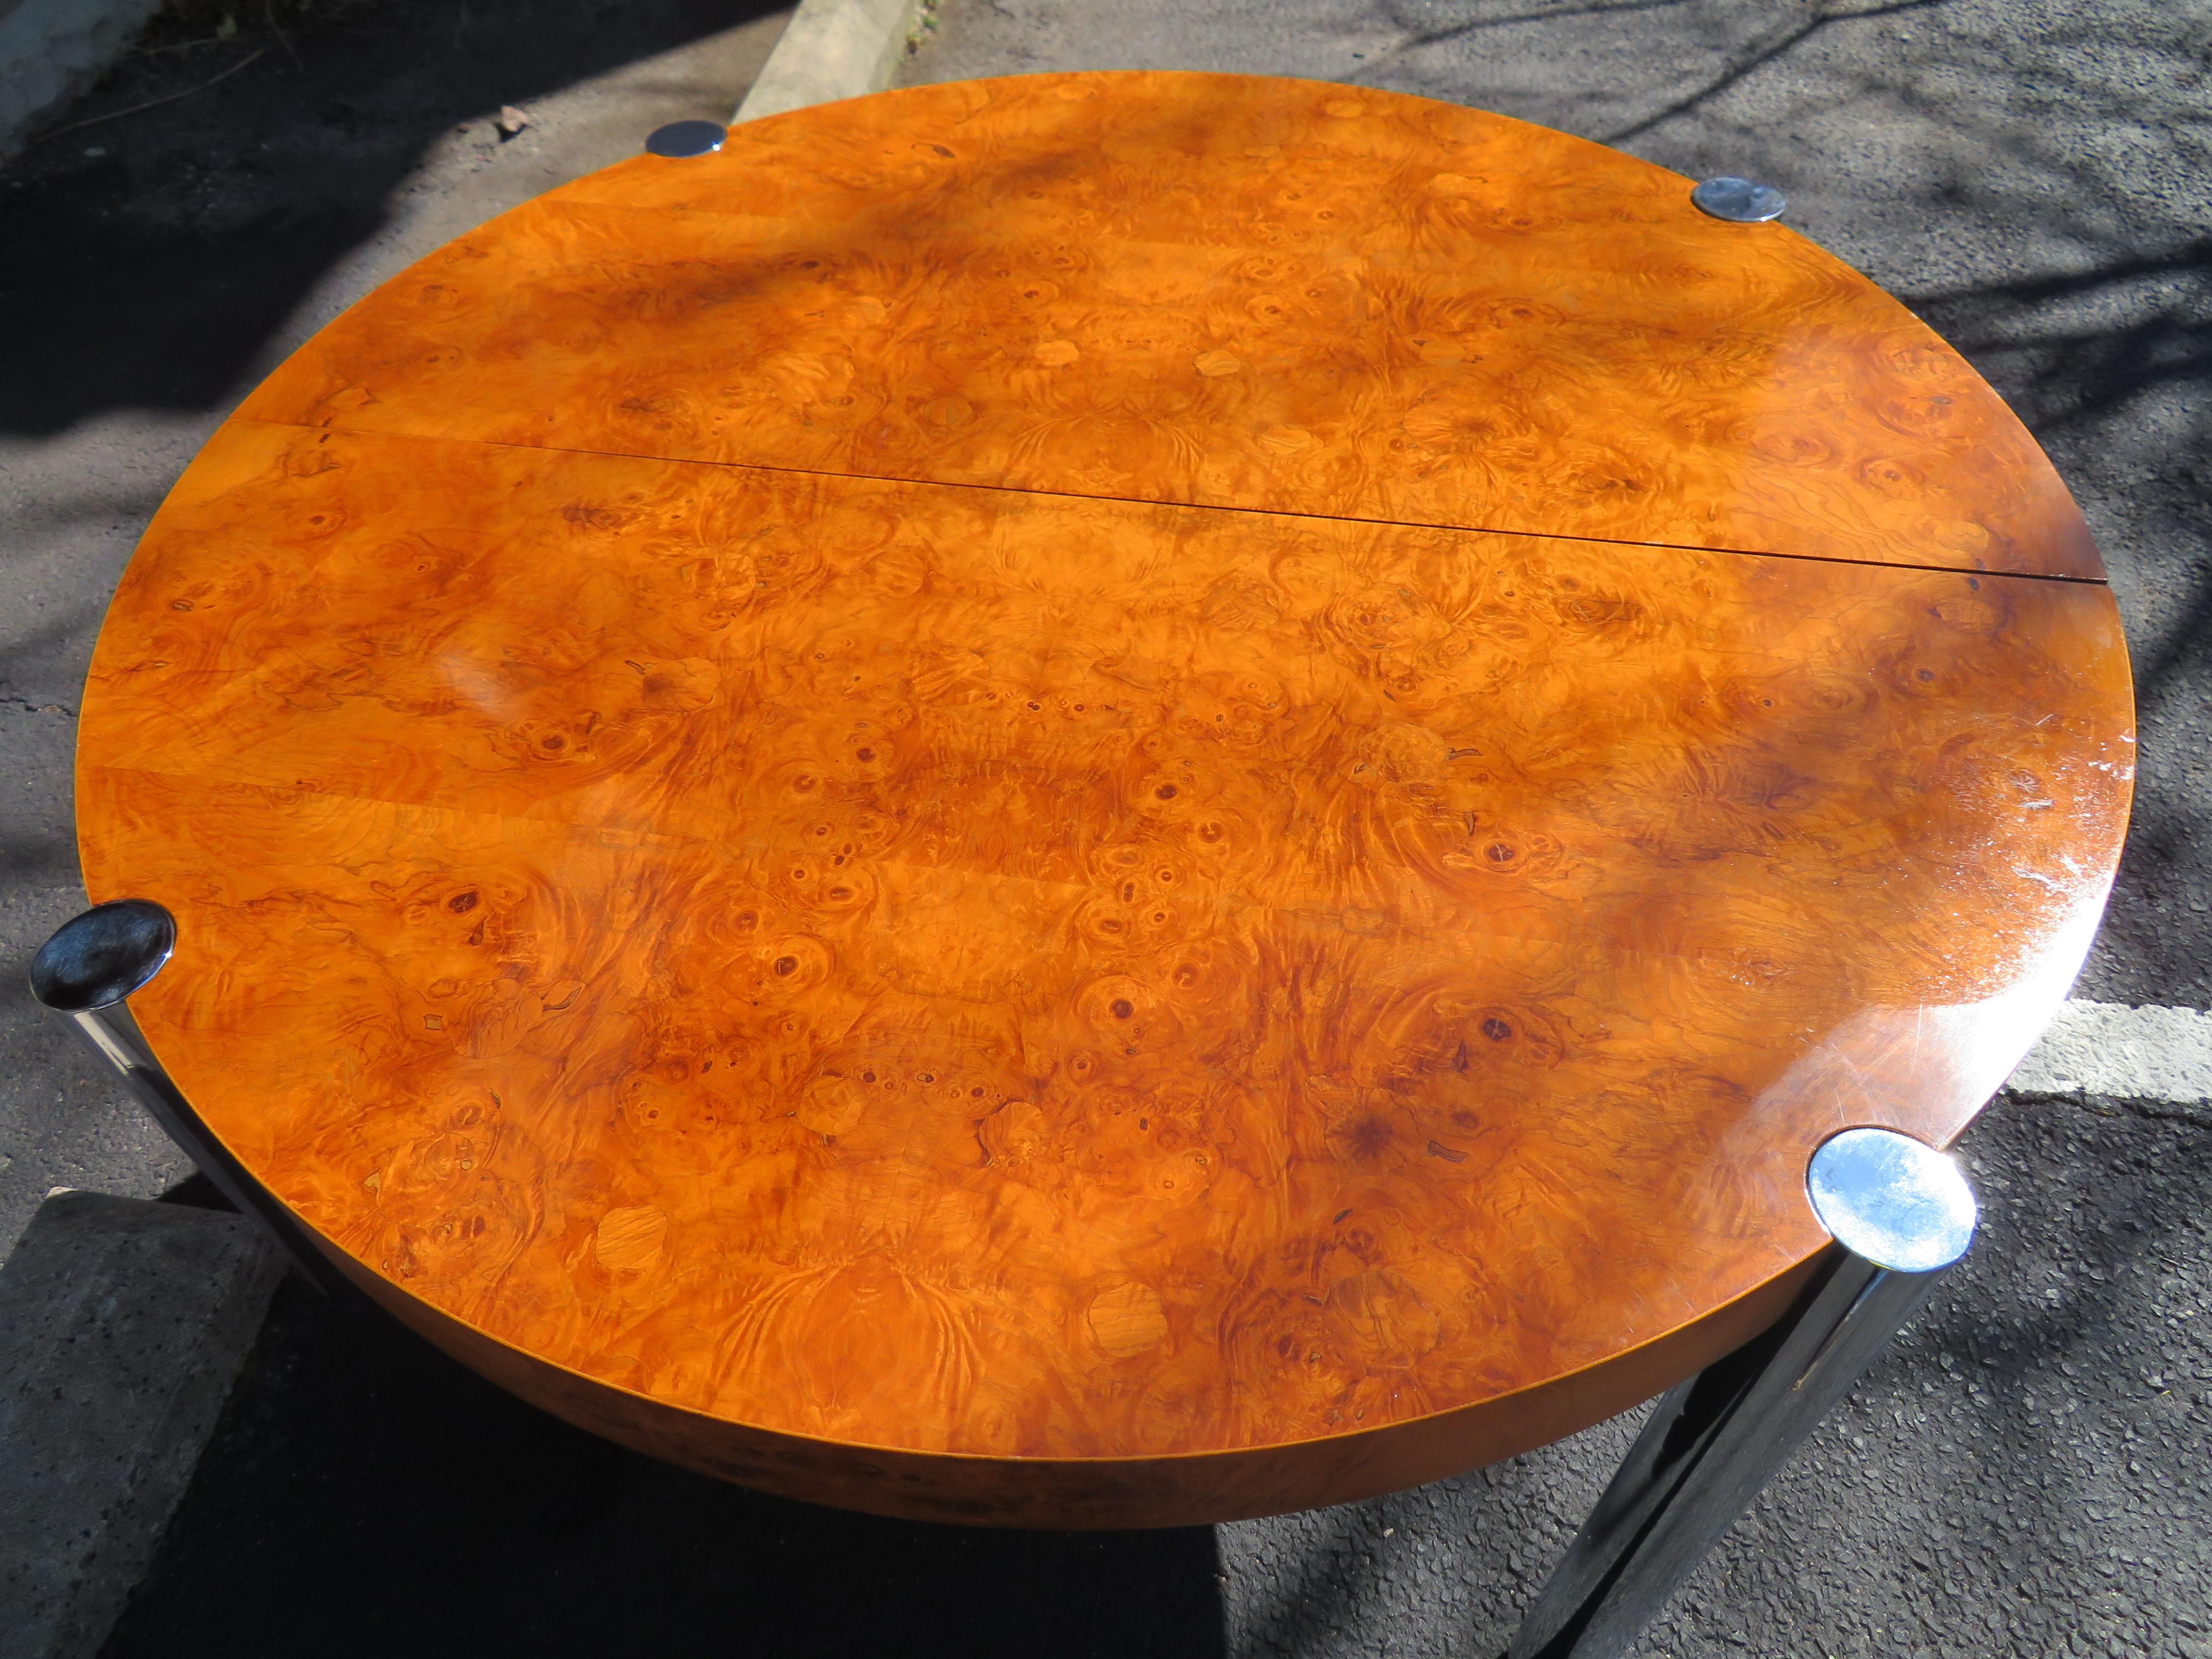 American Fabulous Milo Baughman Style Round Burled Olive Wood Chrome Dining Table